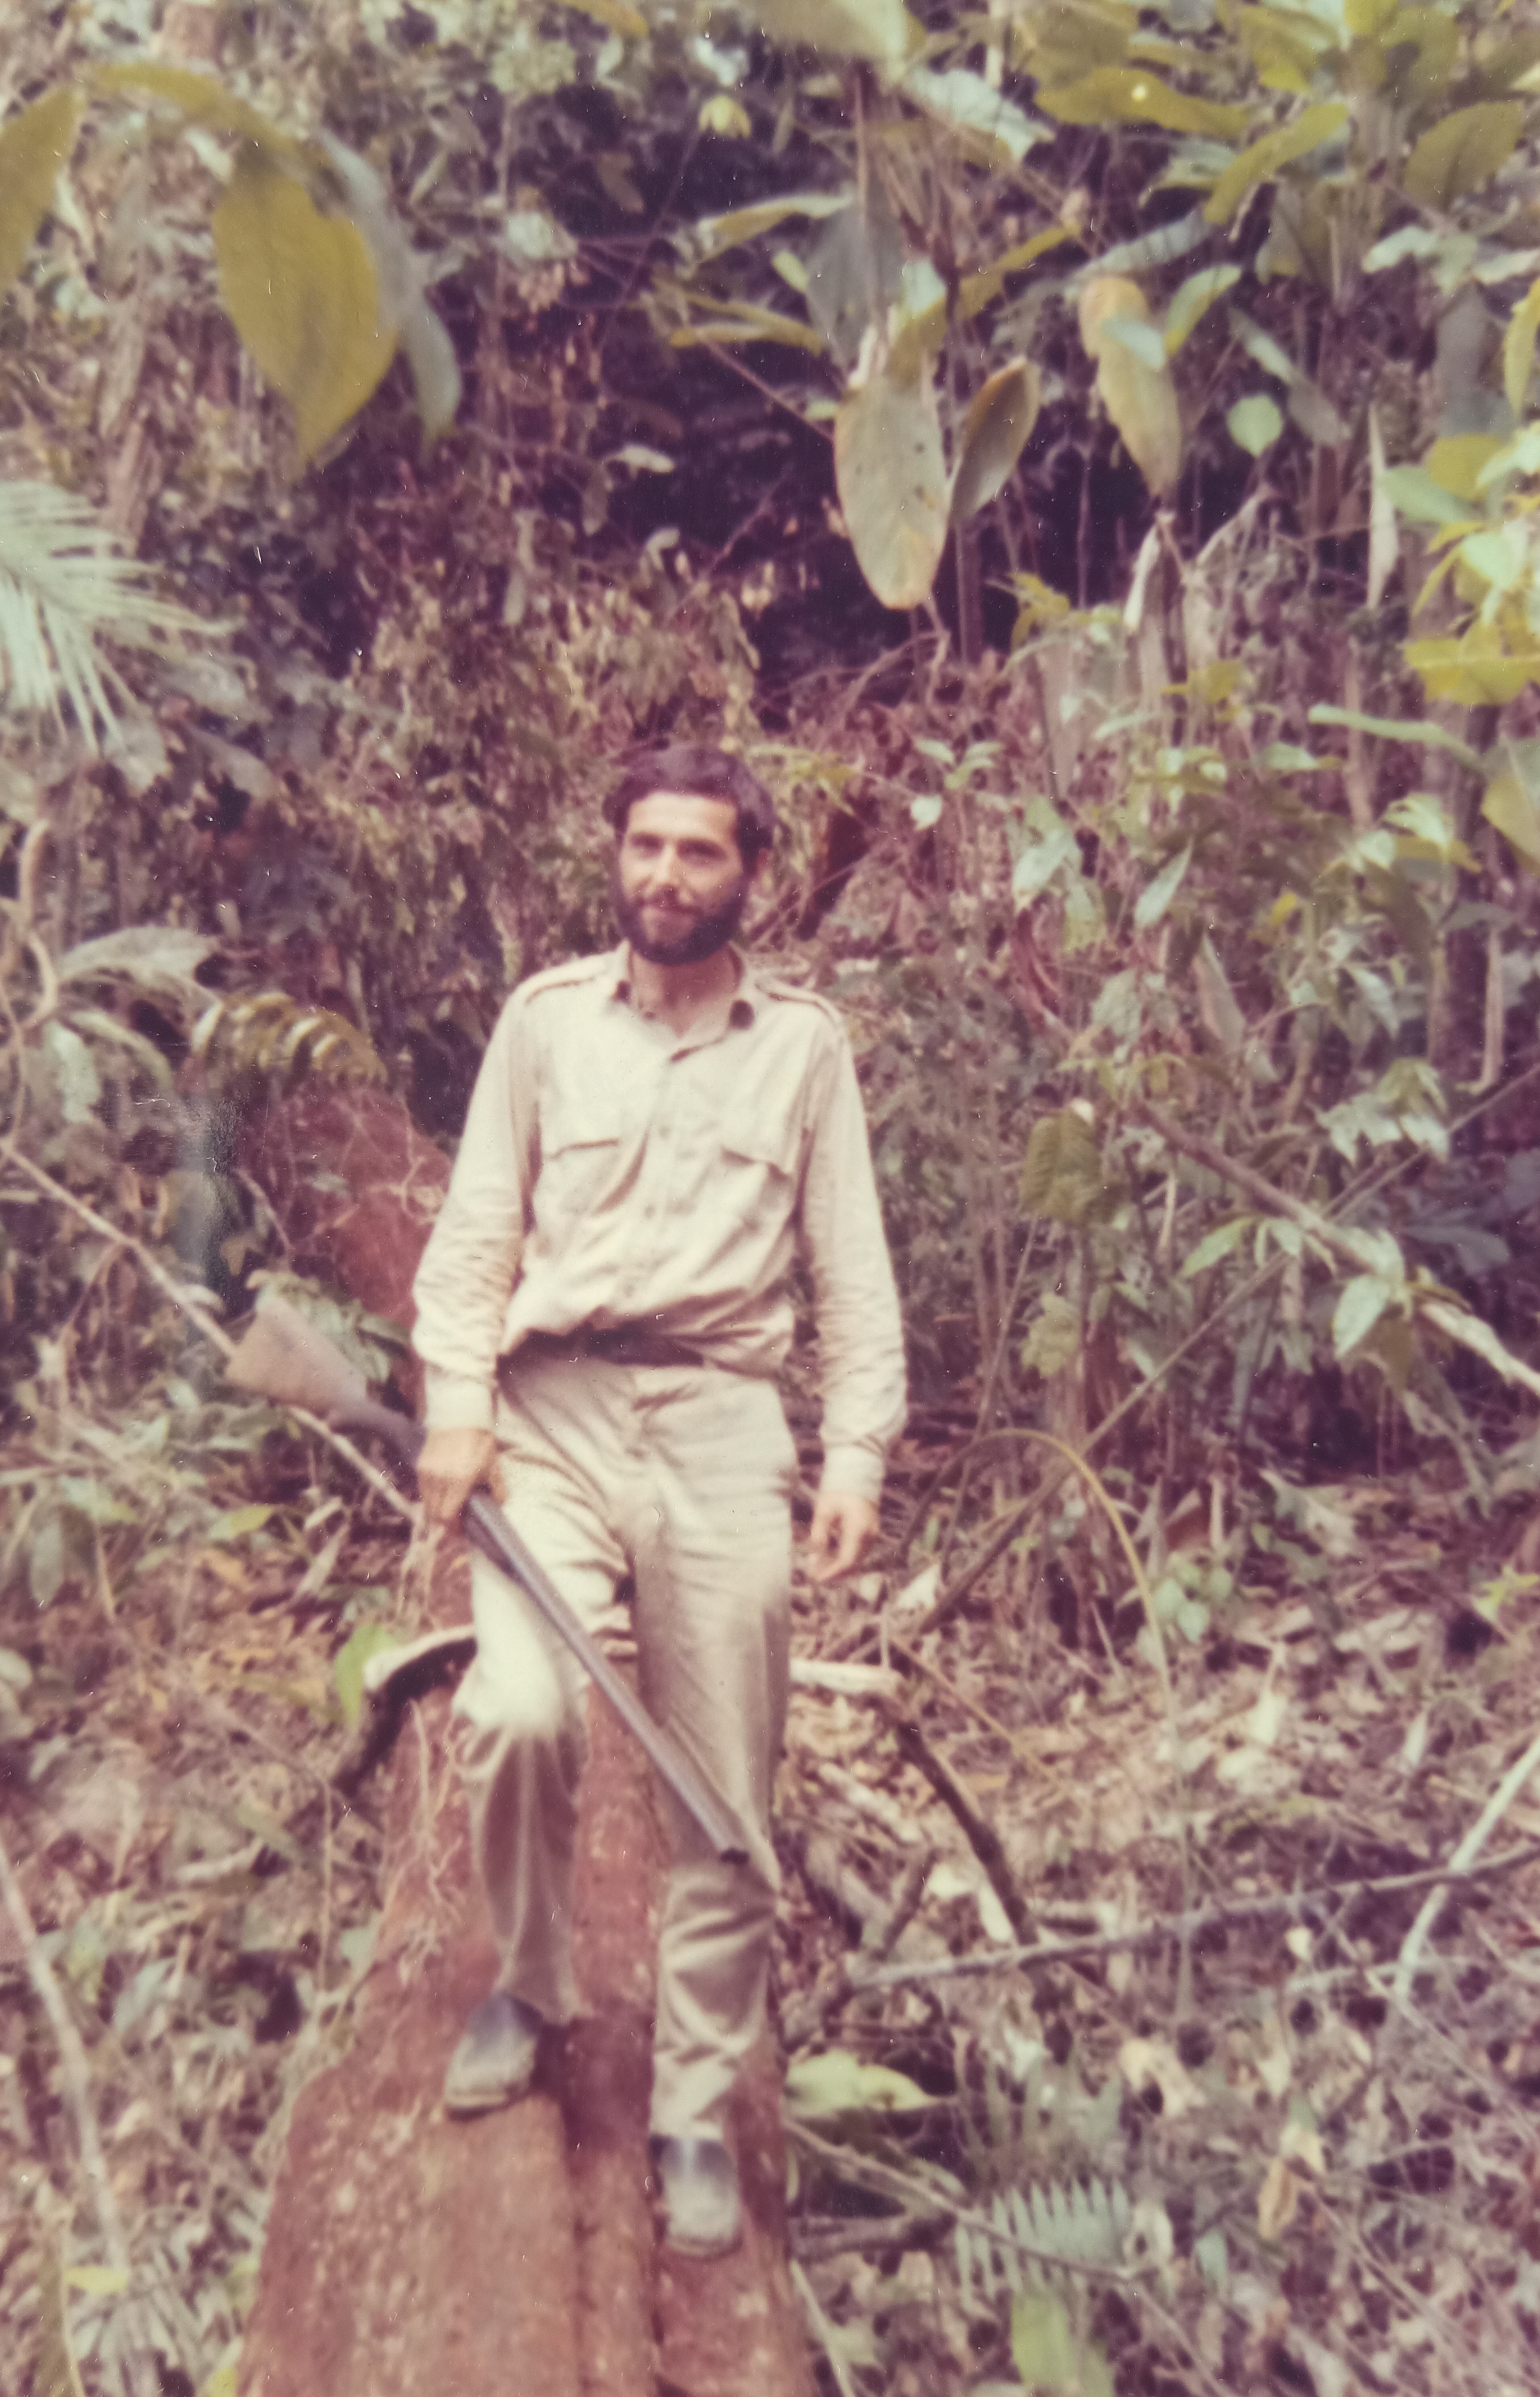 Paul Ort during an expedition in the Amazon, 1962